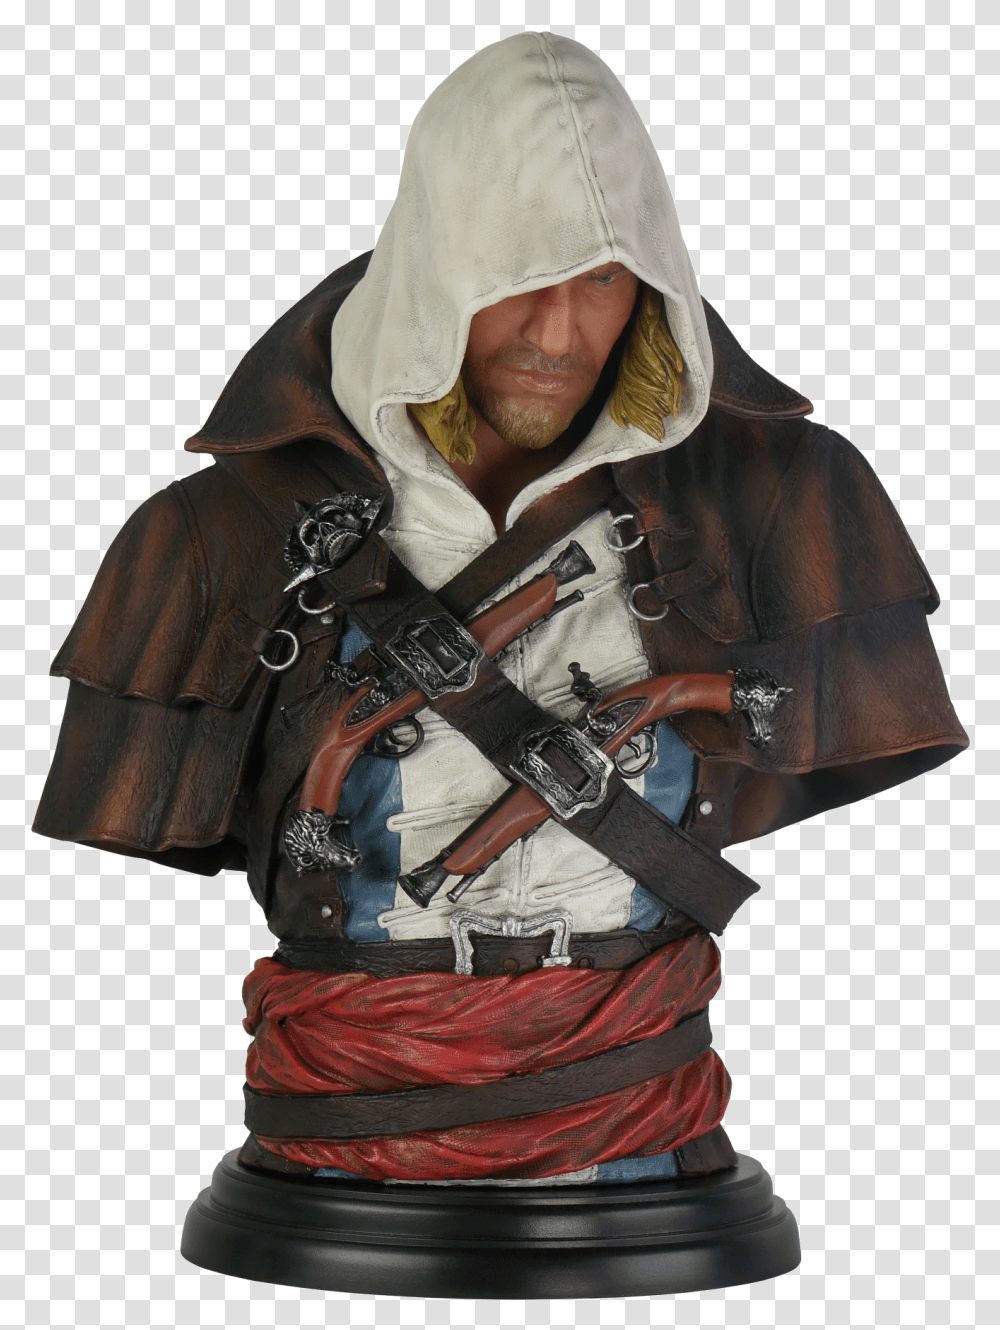 Edward Kenway Bust Download Assassins Creed Bust, Person, Coat, Overcoat Transparent Png